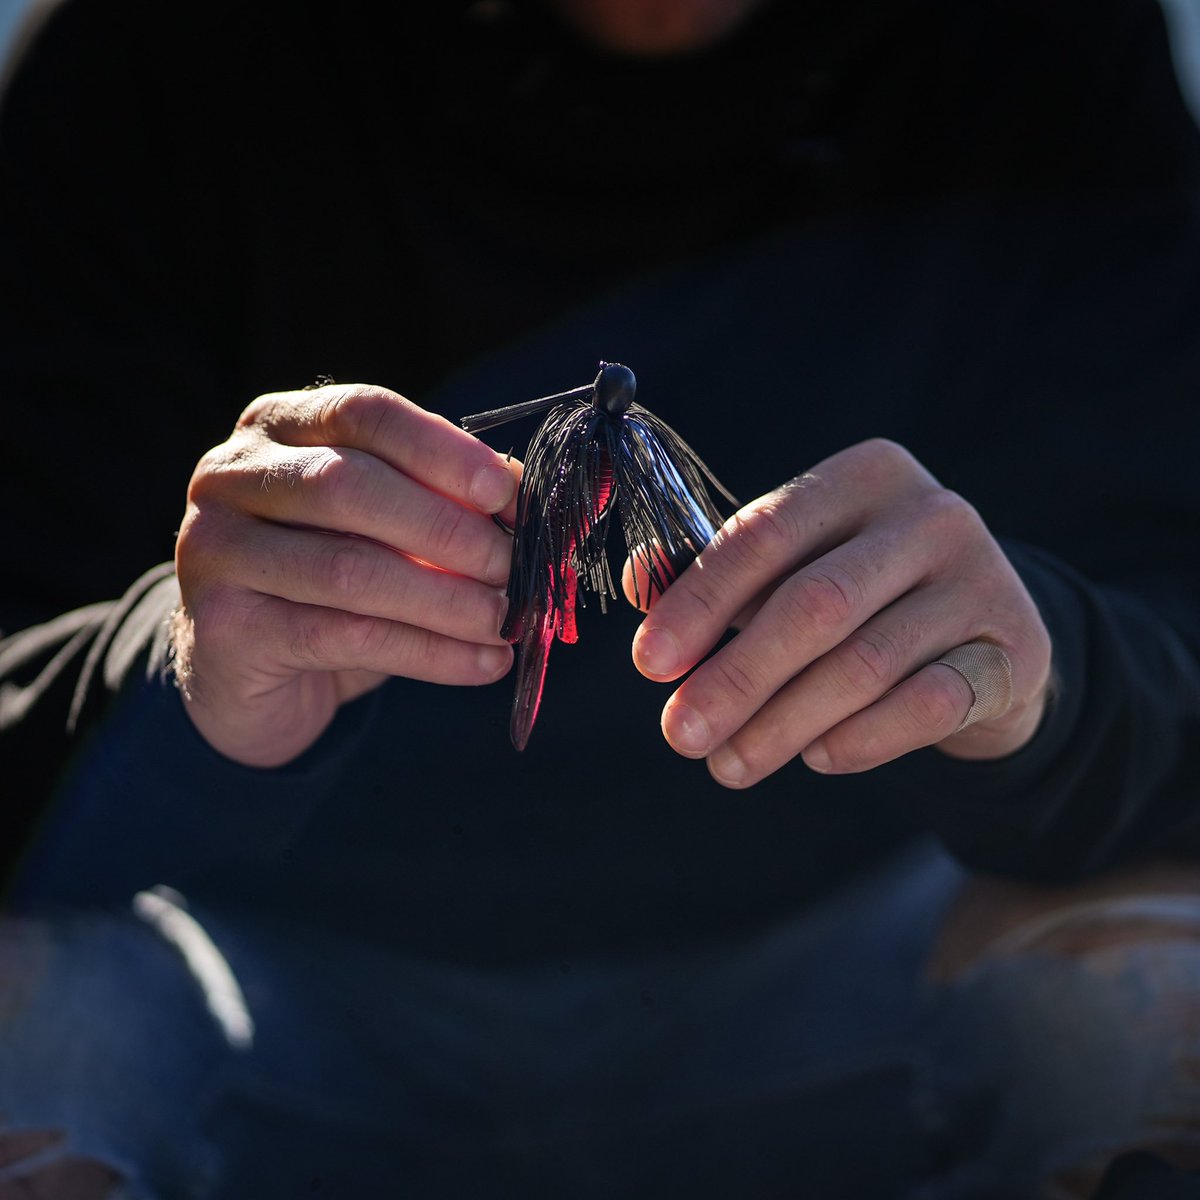 The Mini Flip is a compact flipping jig. It’s the perfect size for flipping around in these tougher fishing months, and getting those big lethargic bass to bite! 🎣 #flippingfriday #missilejigs #jigfishing #winterbassfishing